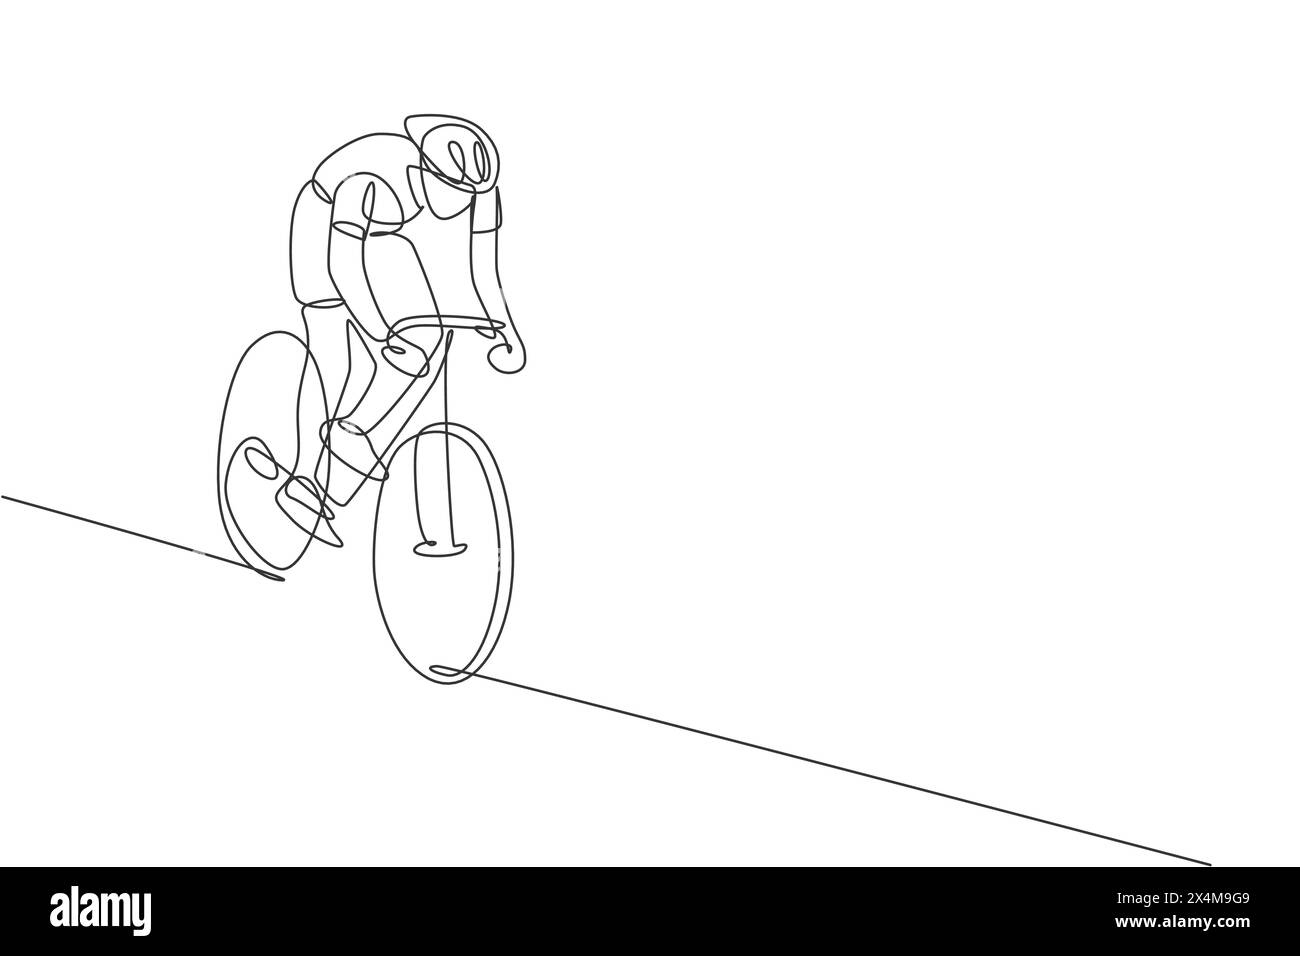 One single line drawing of young energetic man bicycle racer focus to chase after rival vector illustration. Racing cyclist concept. Modern continuous Stock Vector